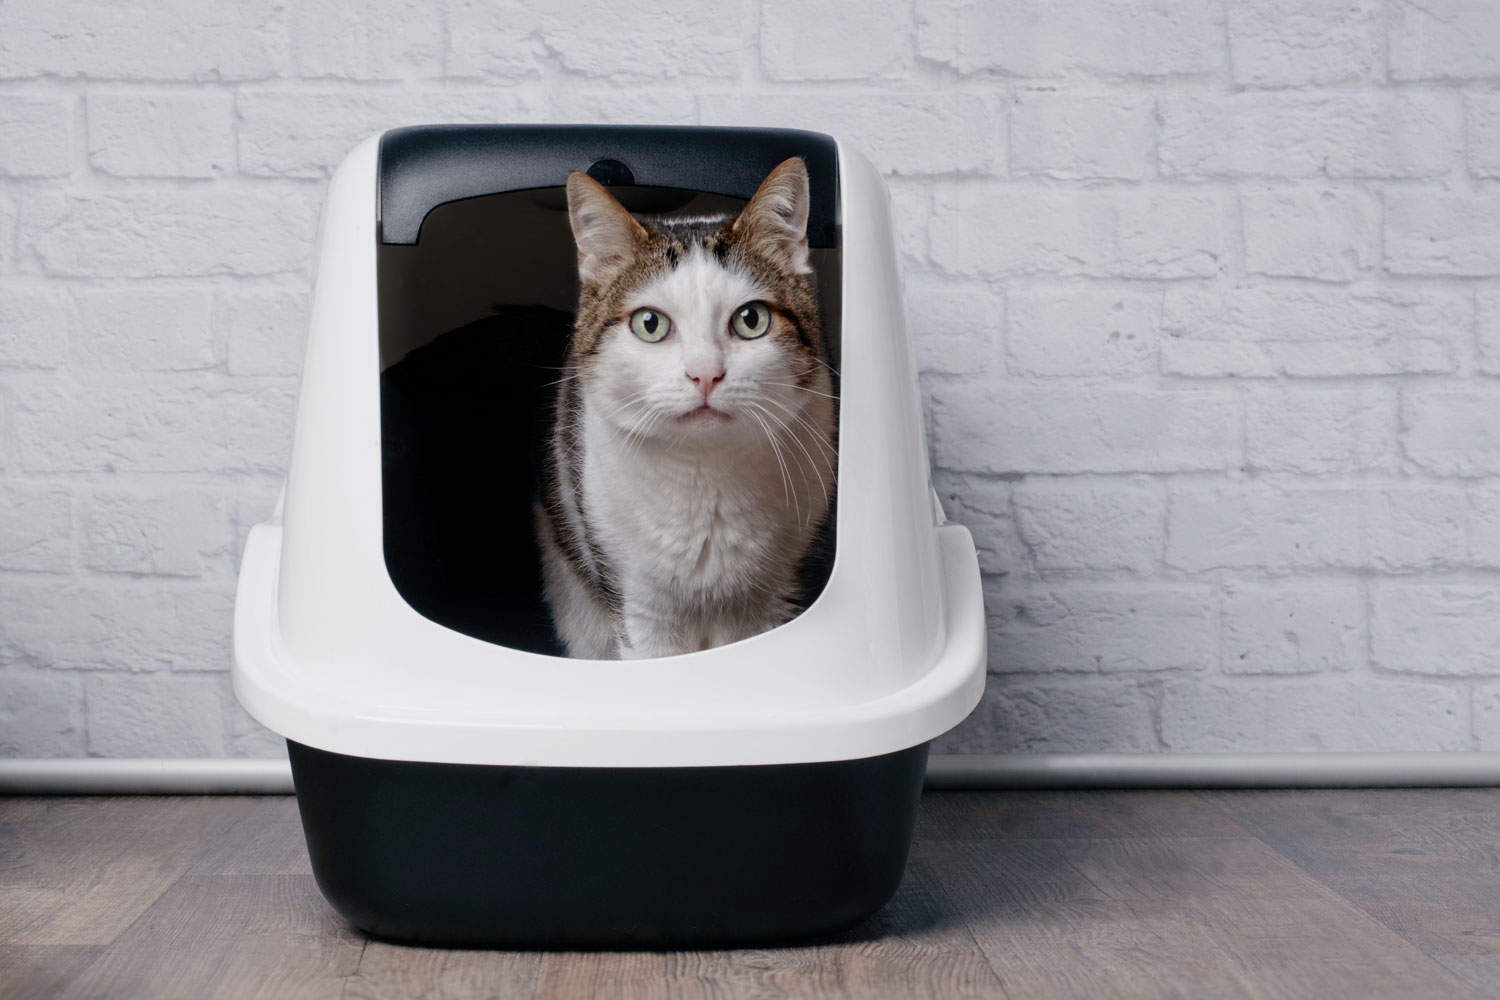 Shy Tabby cat sitting in a litter box and look to the camera.
